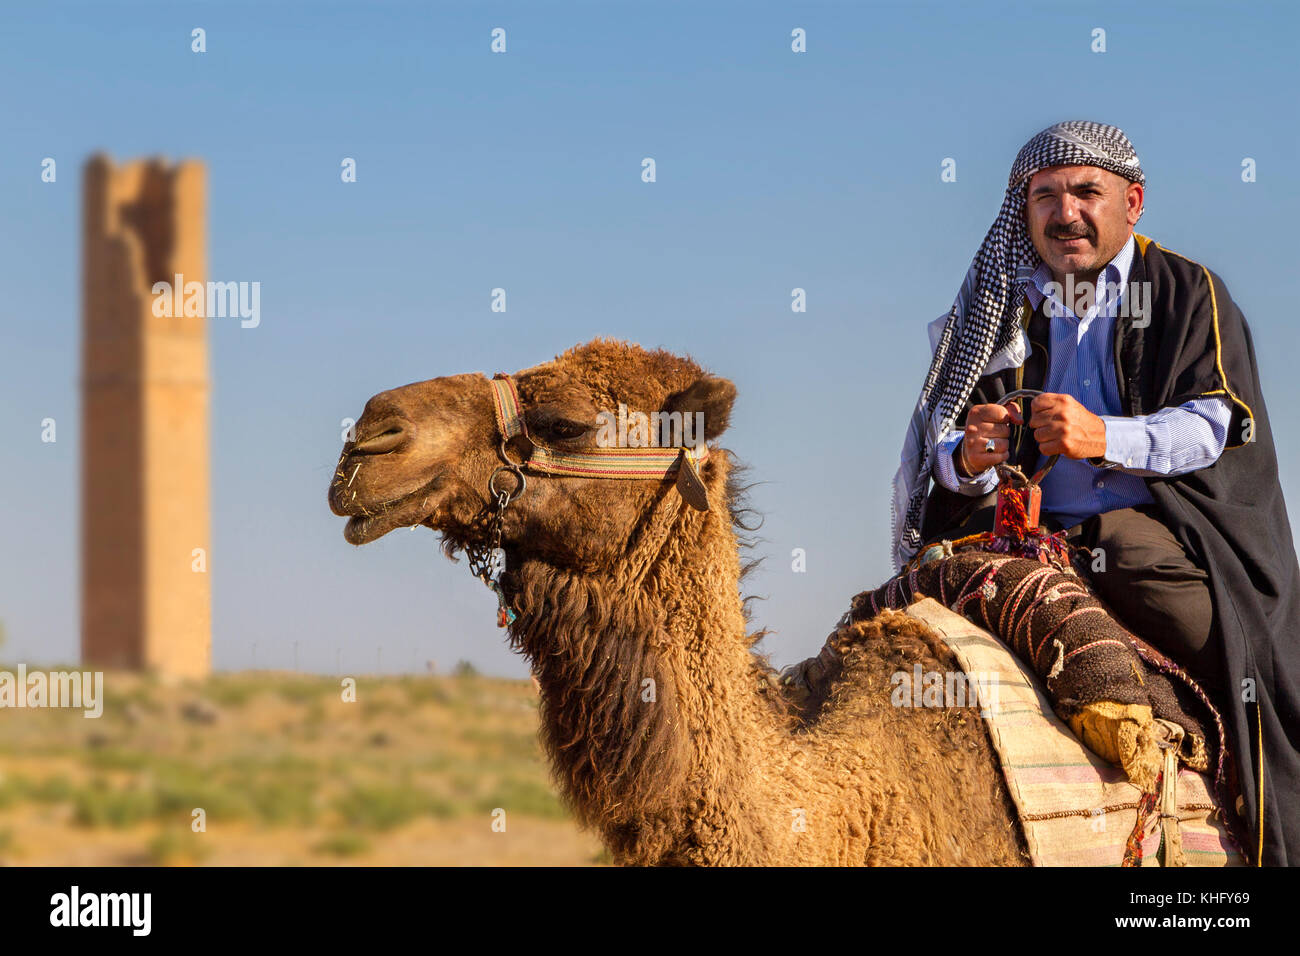 Man in local dresses riding a camel in the town of Harran, Sanliurfa, Turkey. Stock Photo